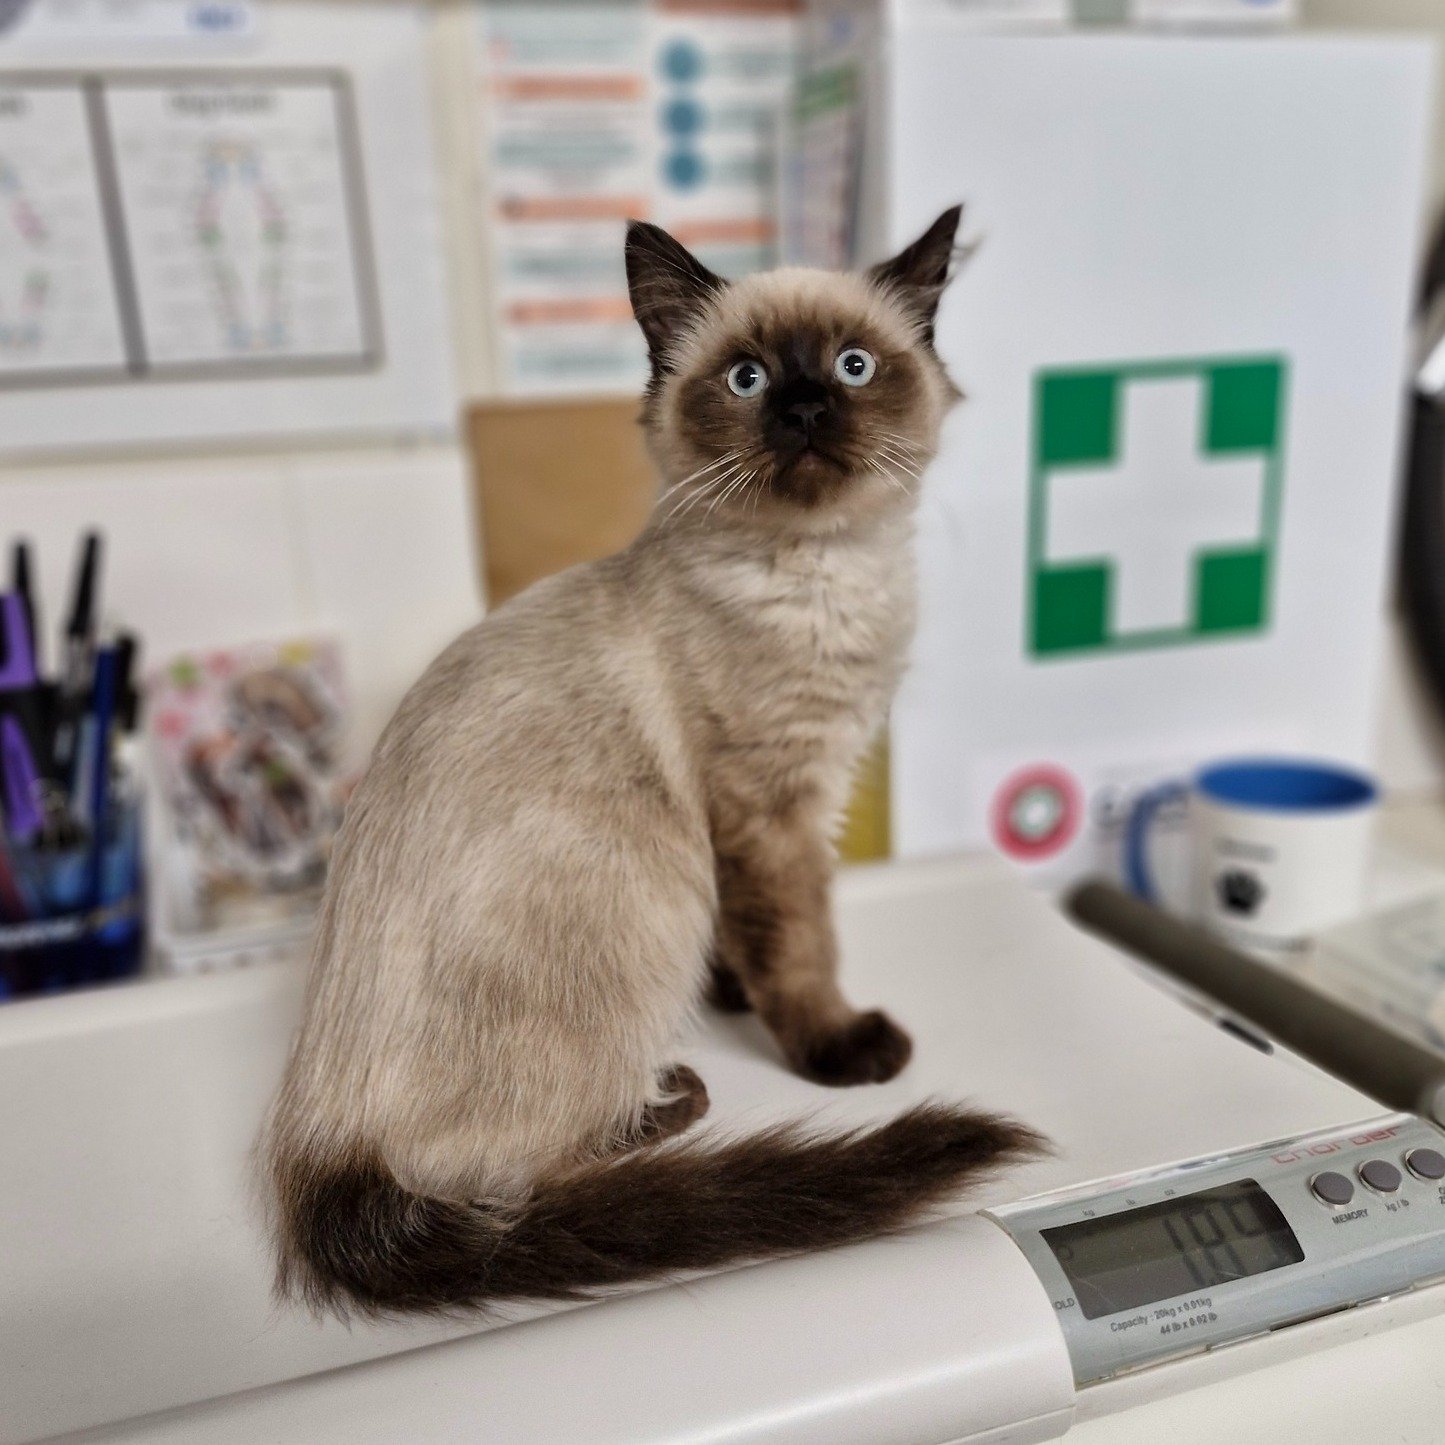 Weigh in time for mighty little Hamilton. Monitoring your kittens weight helps make sure they are growing as they should be. Hamilton hit 1.85kg today!